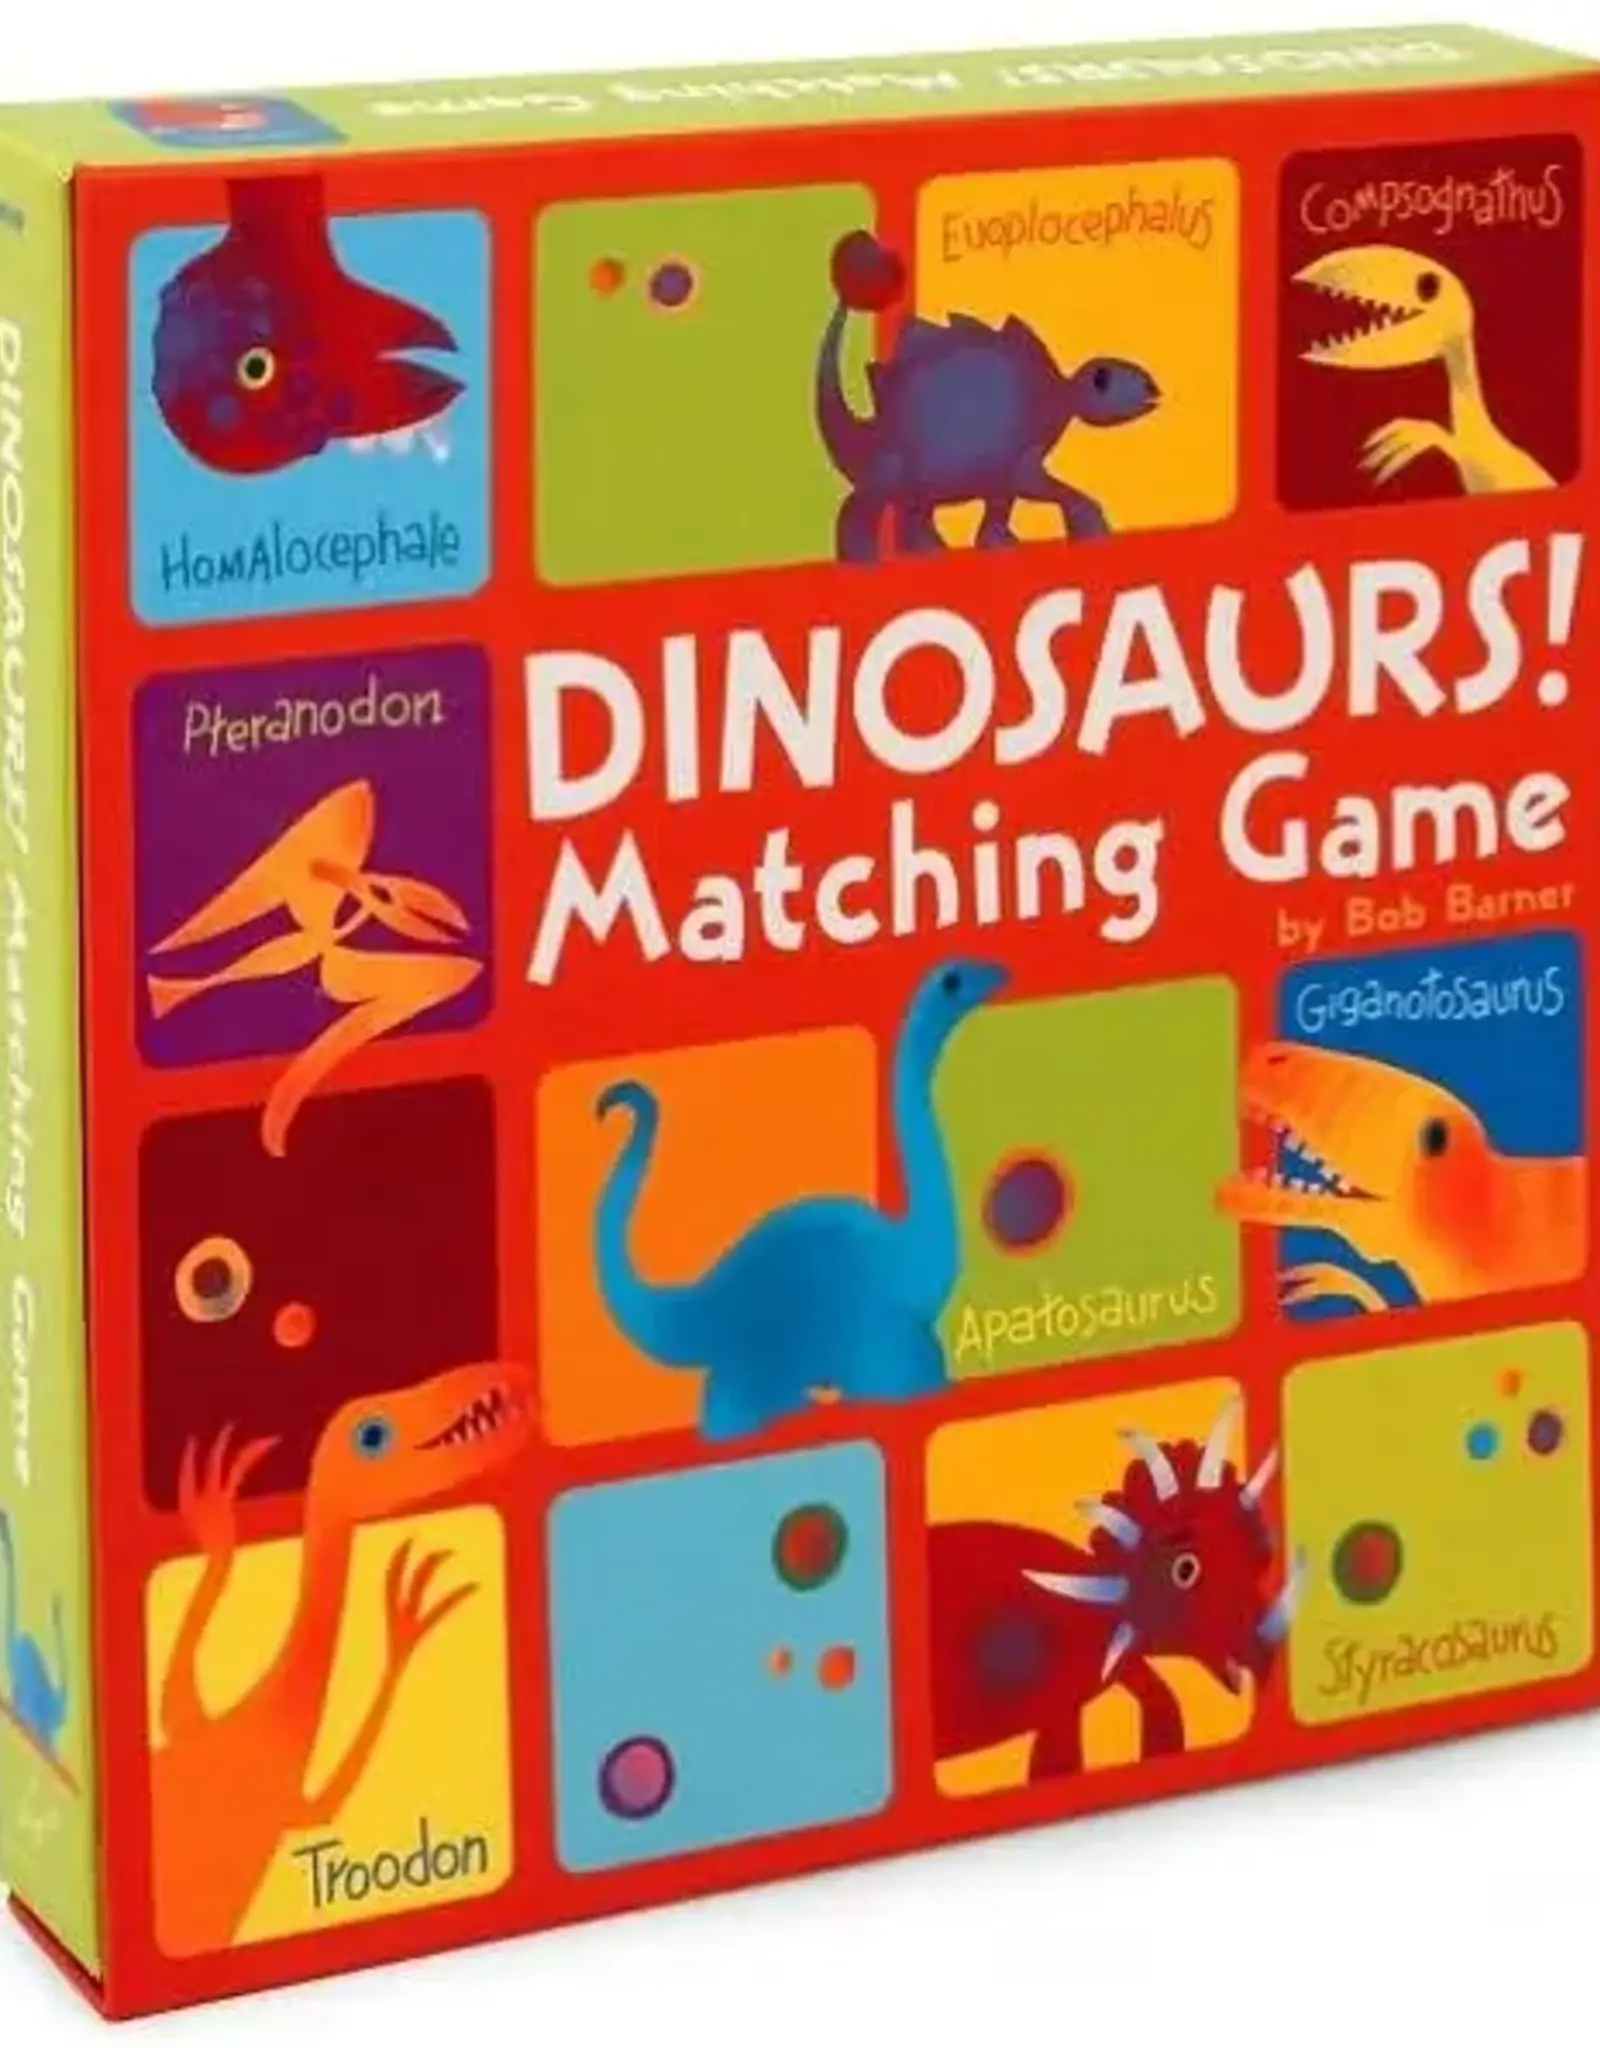 BOOK PUBLISHERS DINOSAURS MATCHING GAME